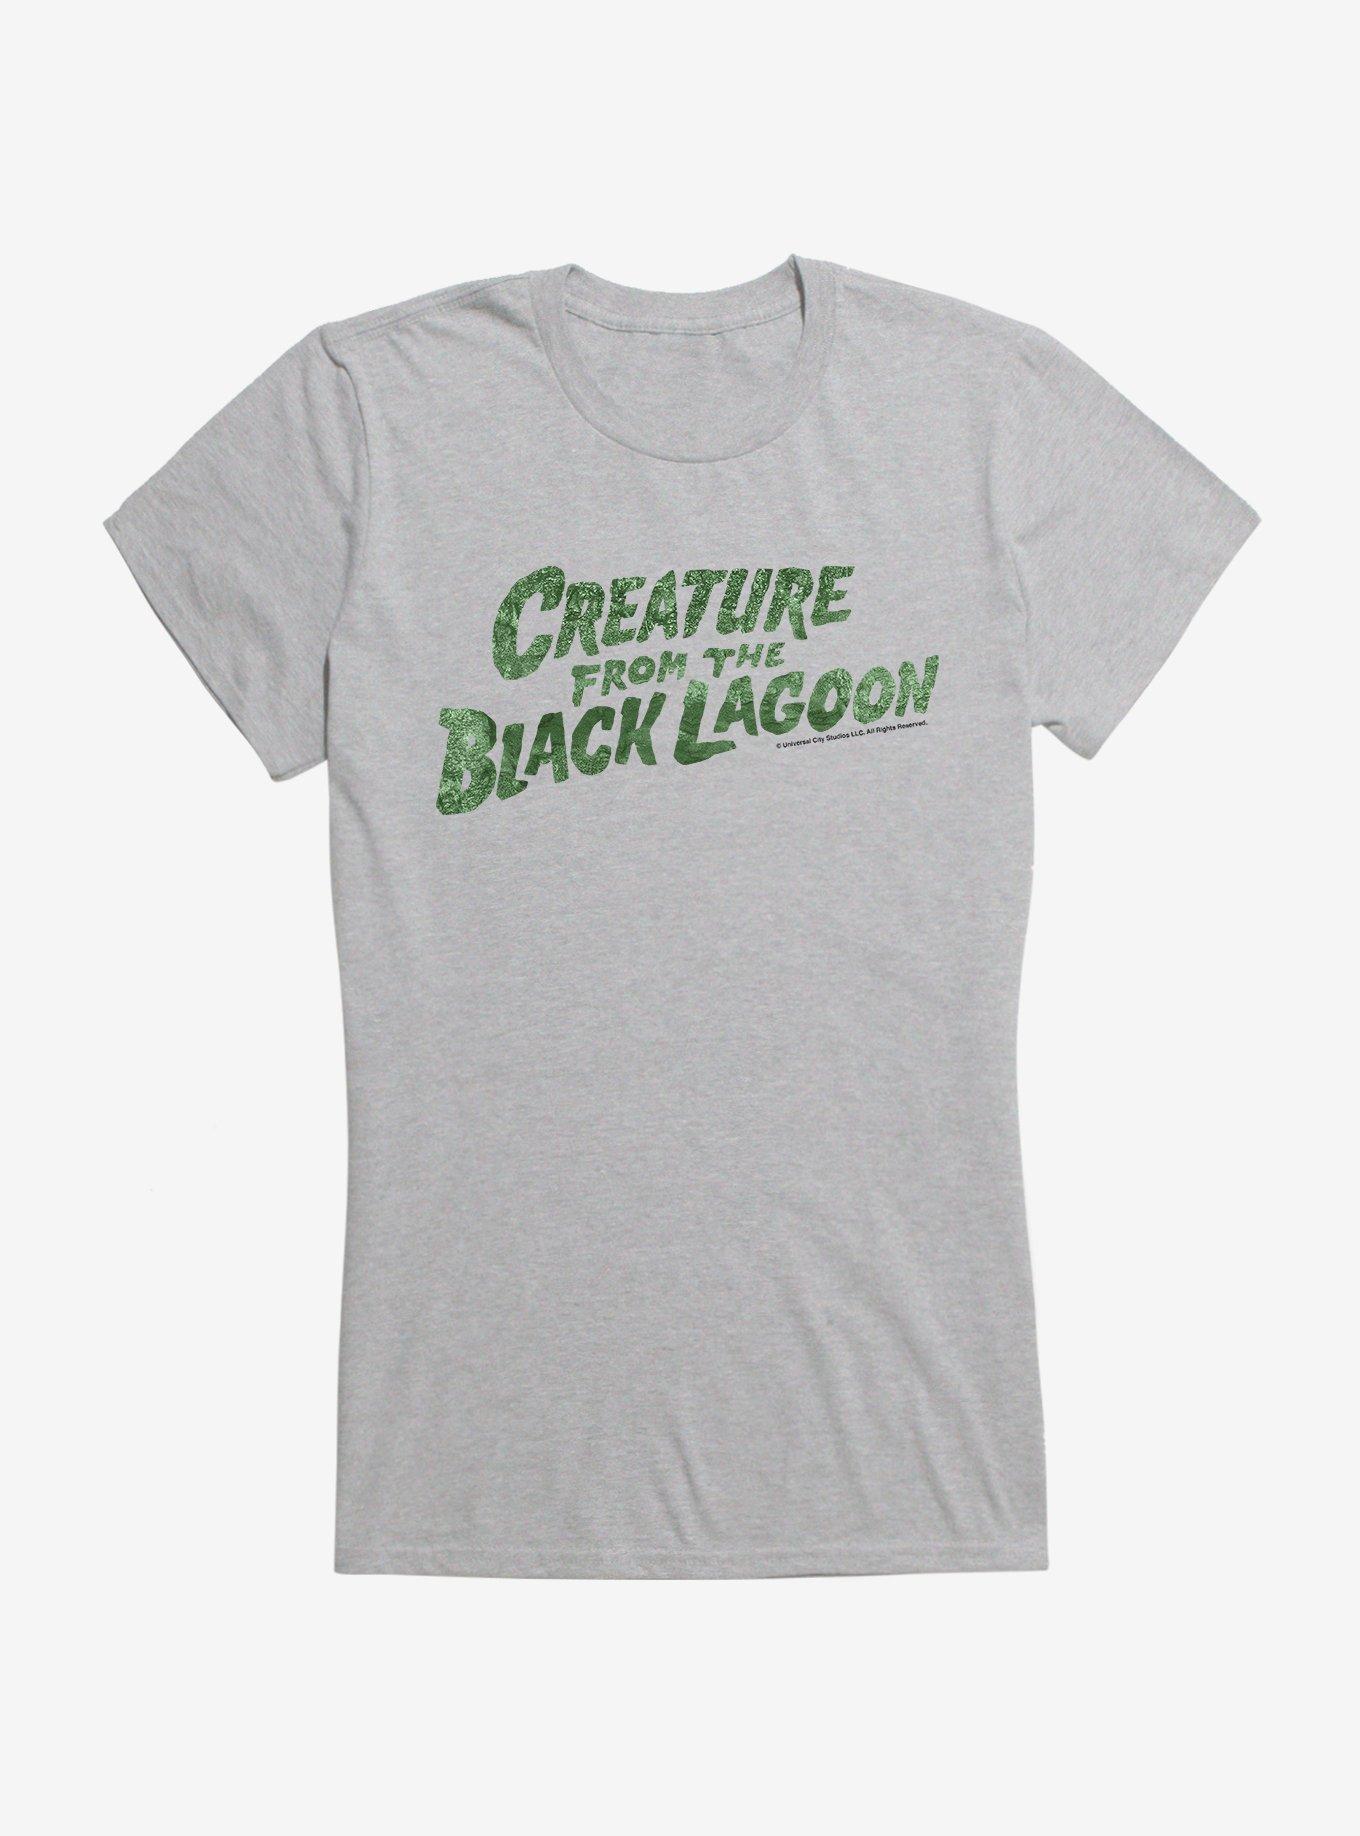 The Creature From The Black Lagoon Title Girls T-Shirt, HEATHER, hi-res